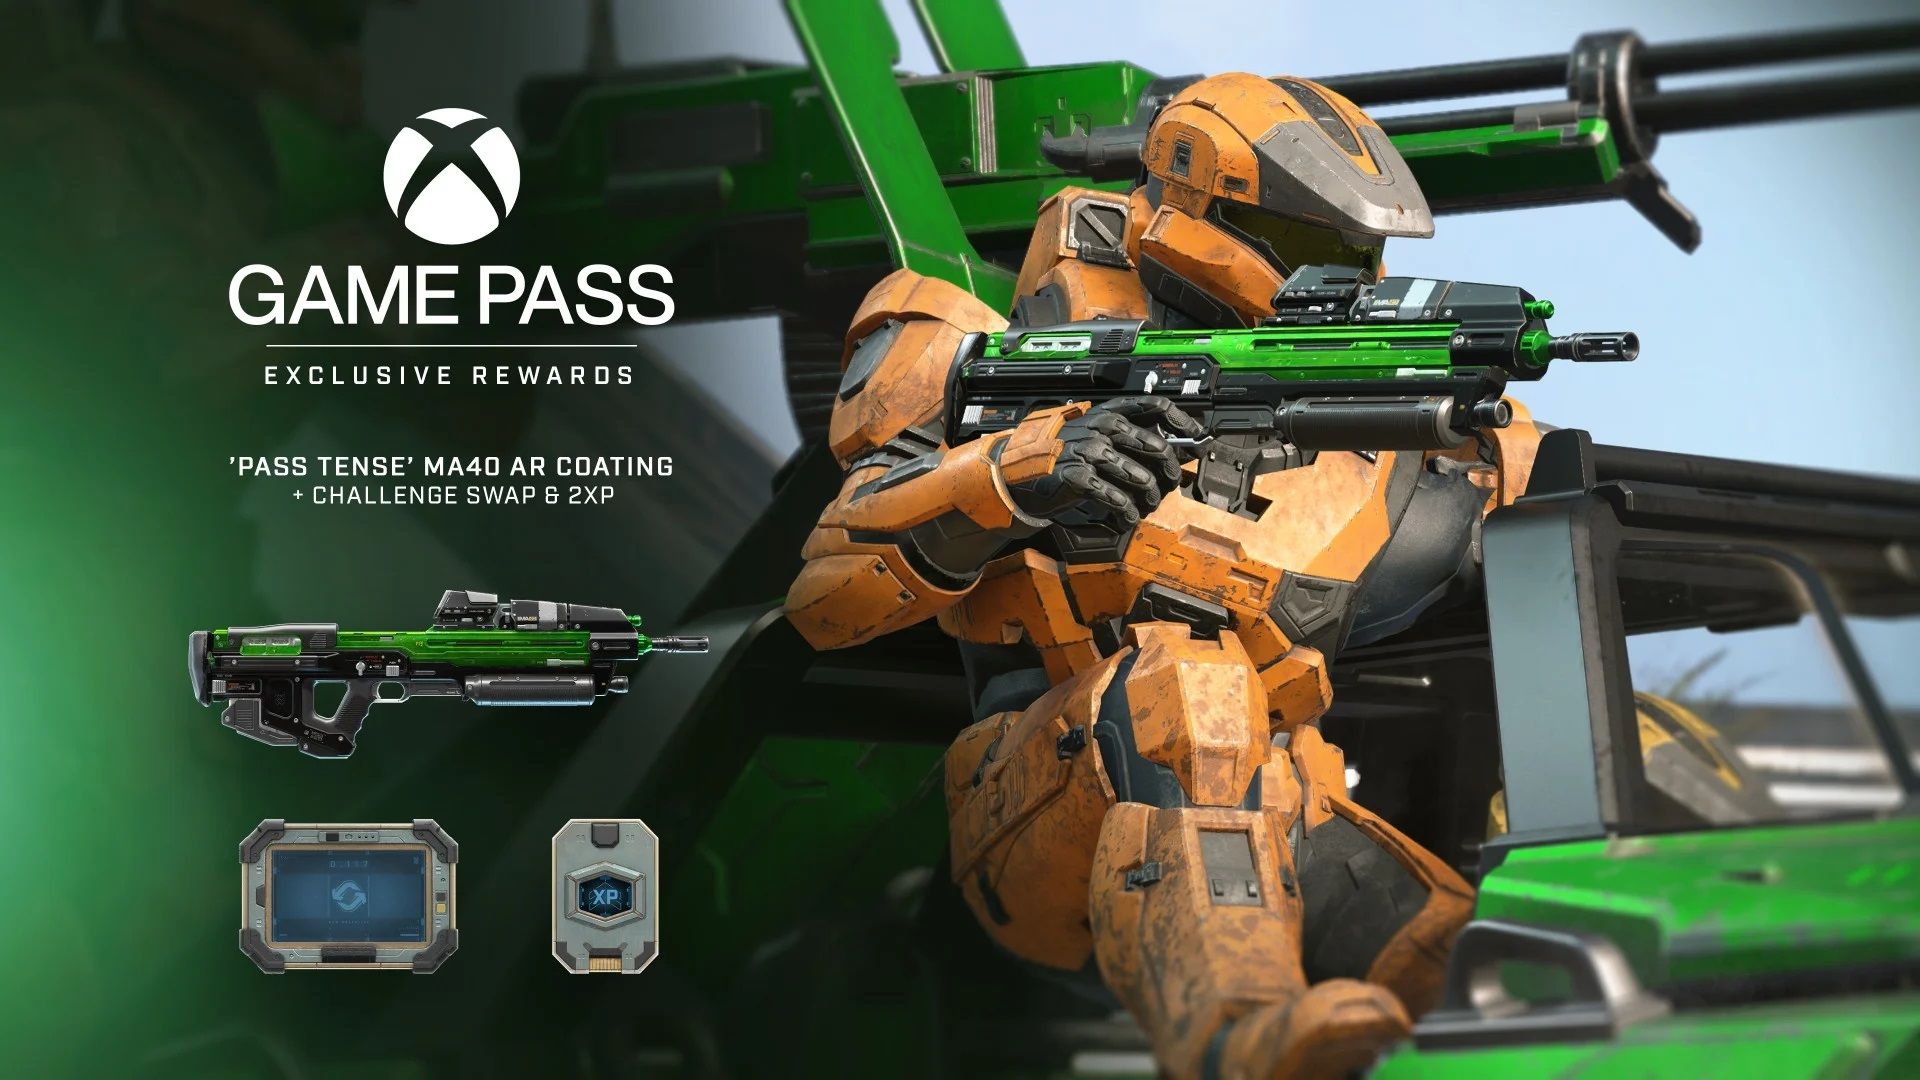 Free monthly Halo Infinite loot coming to Game Pass subscribers photo 1